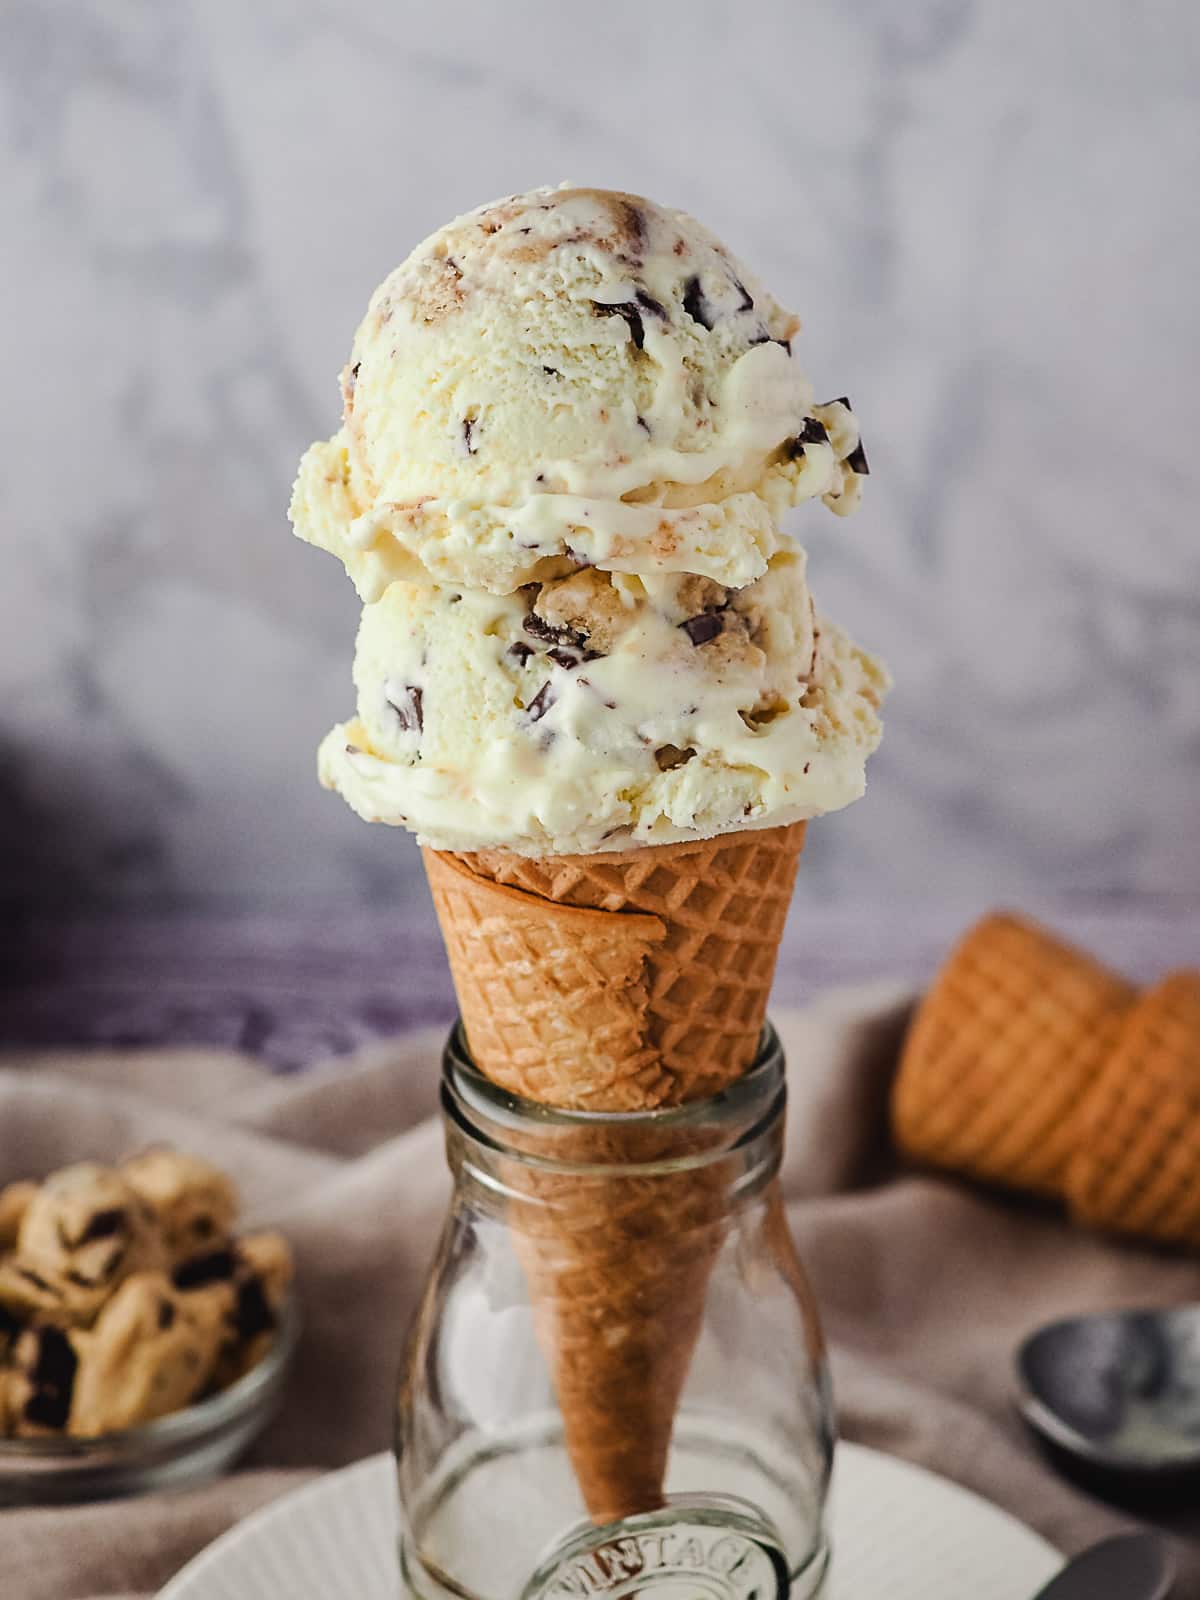 Two scoops of ice cream in a cone, with edible cookie dough and ice cream cones in background.